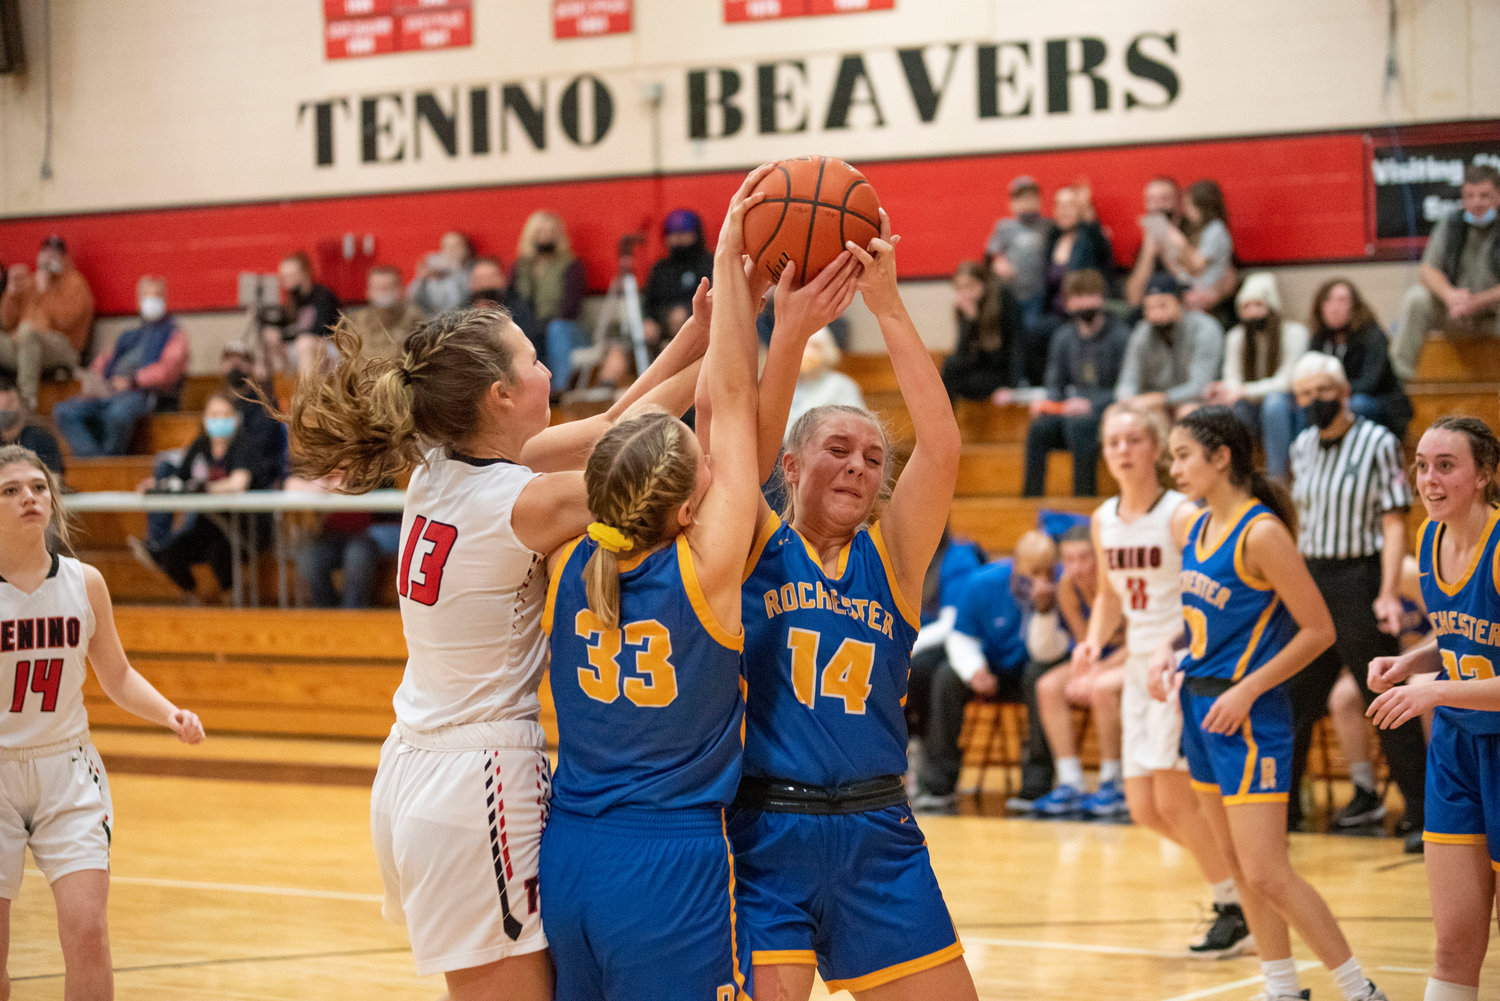 Rochester's Hailey Angwood (14), Hannah Rodeheaver (33) and Tenino's Rilee Jones (13) battle for a rebound on Dec. 2.